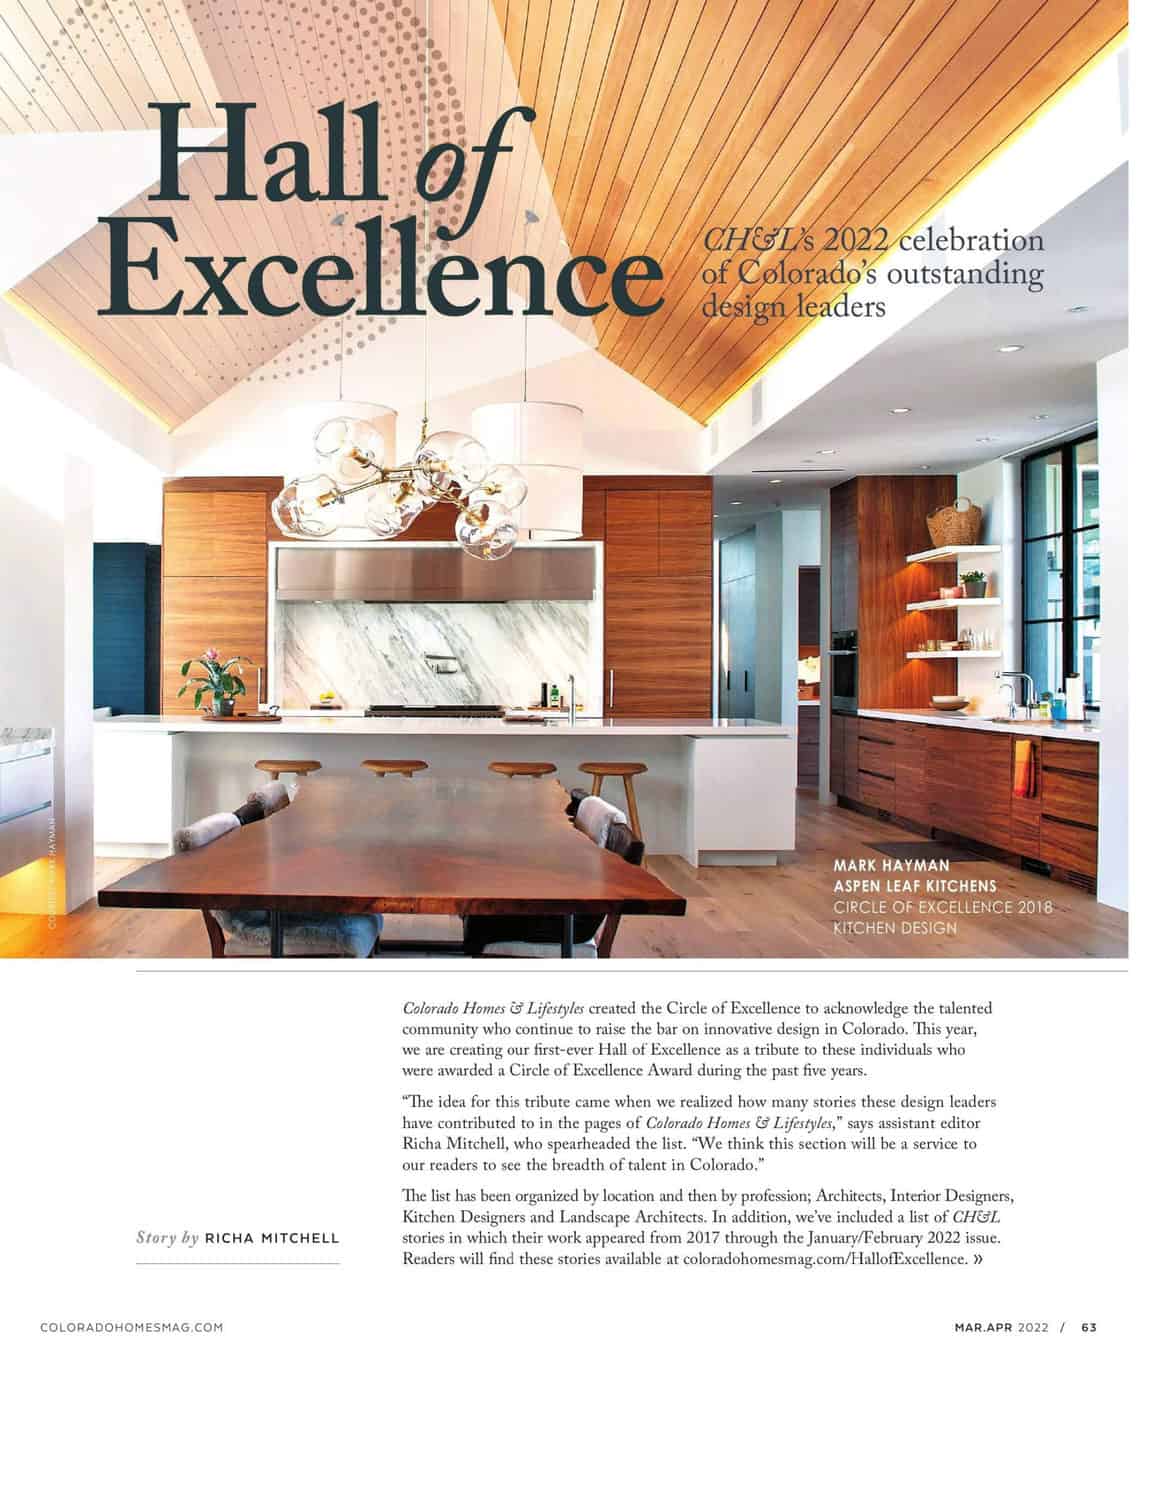 Colorado Homes 2022 Hall of Excellence title page